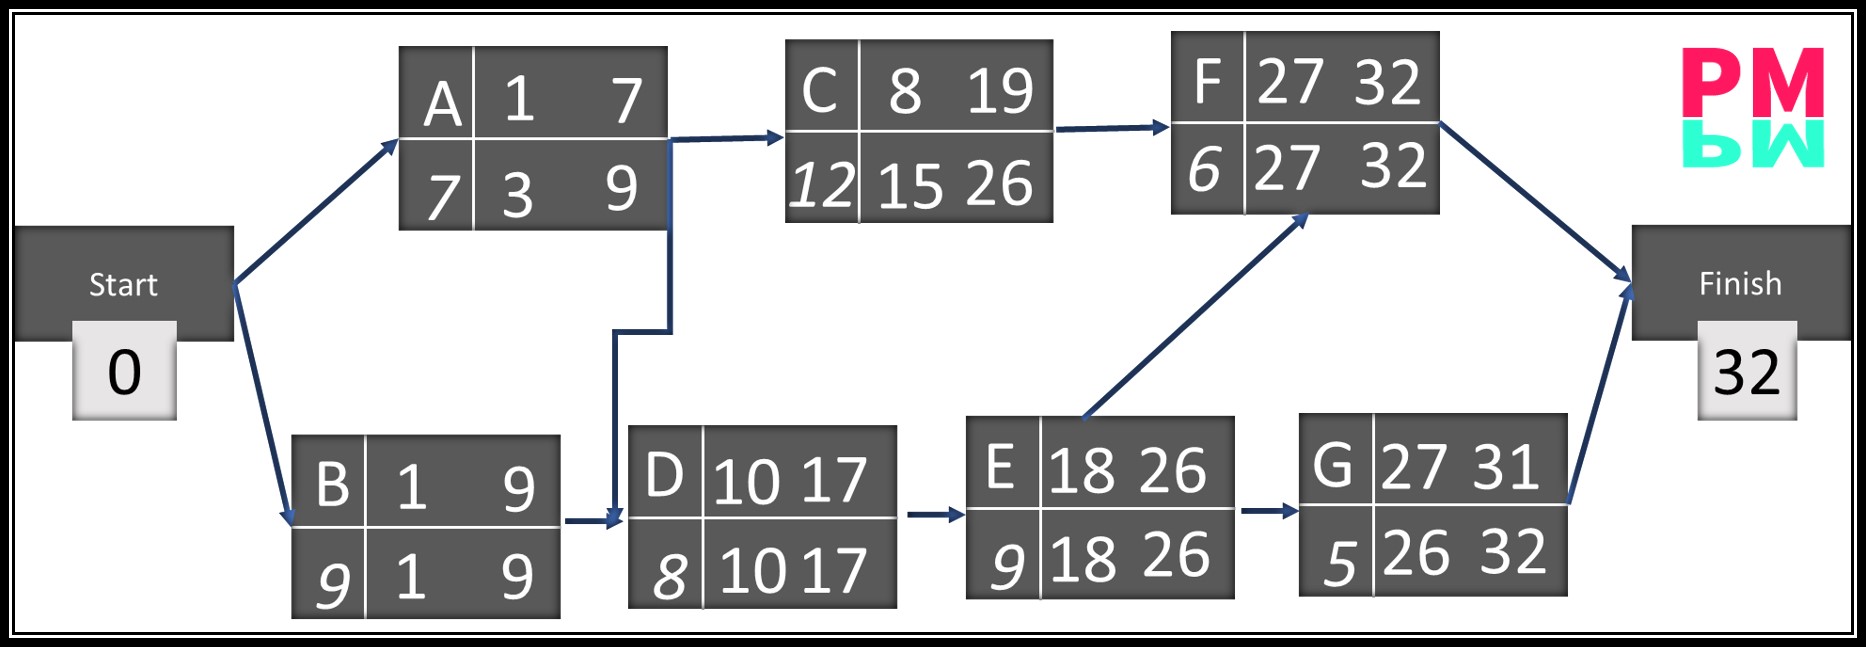 Backward pass calculations in a CPM